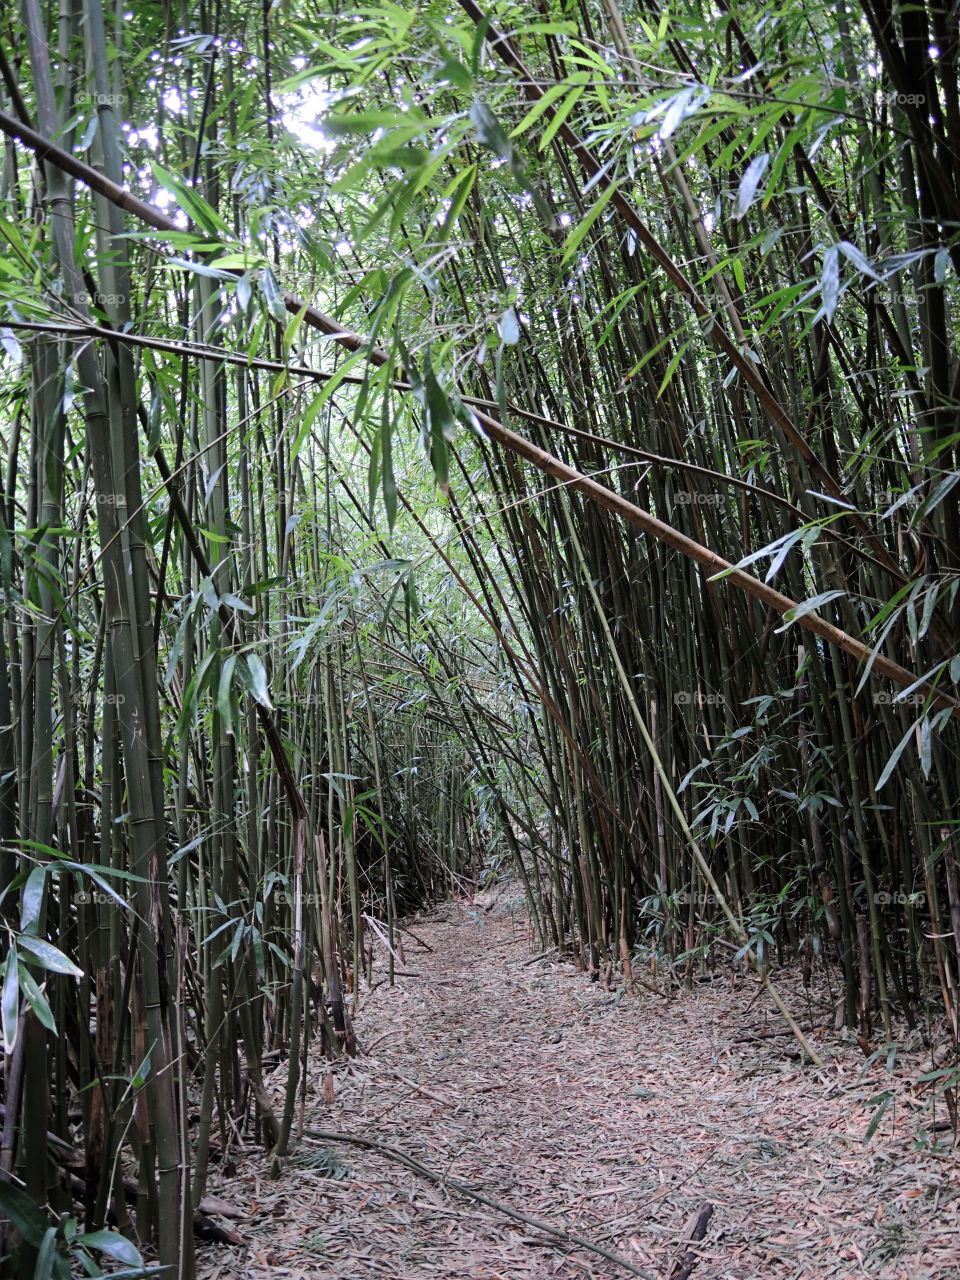 Footpath through bamboo forest